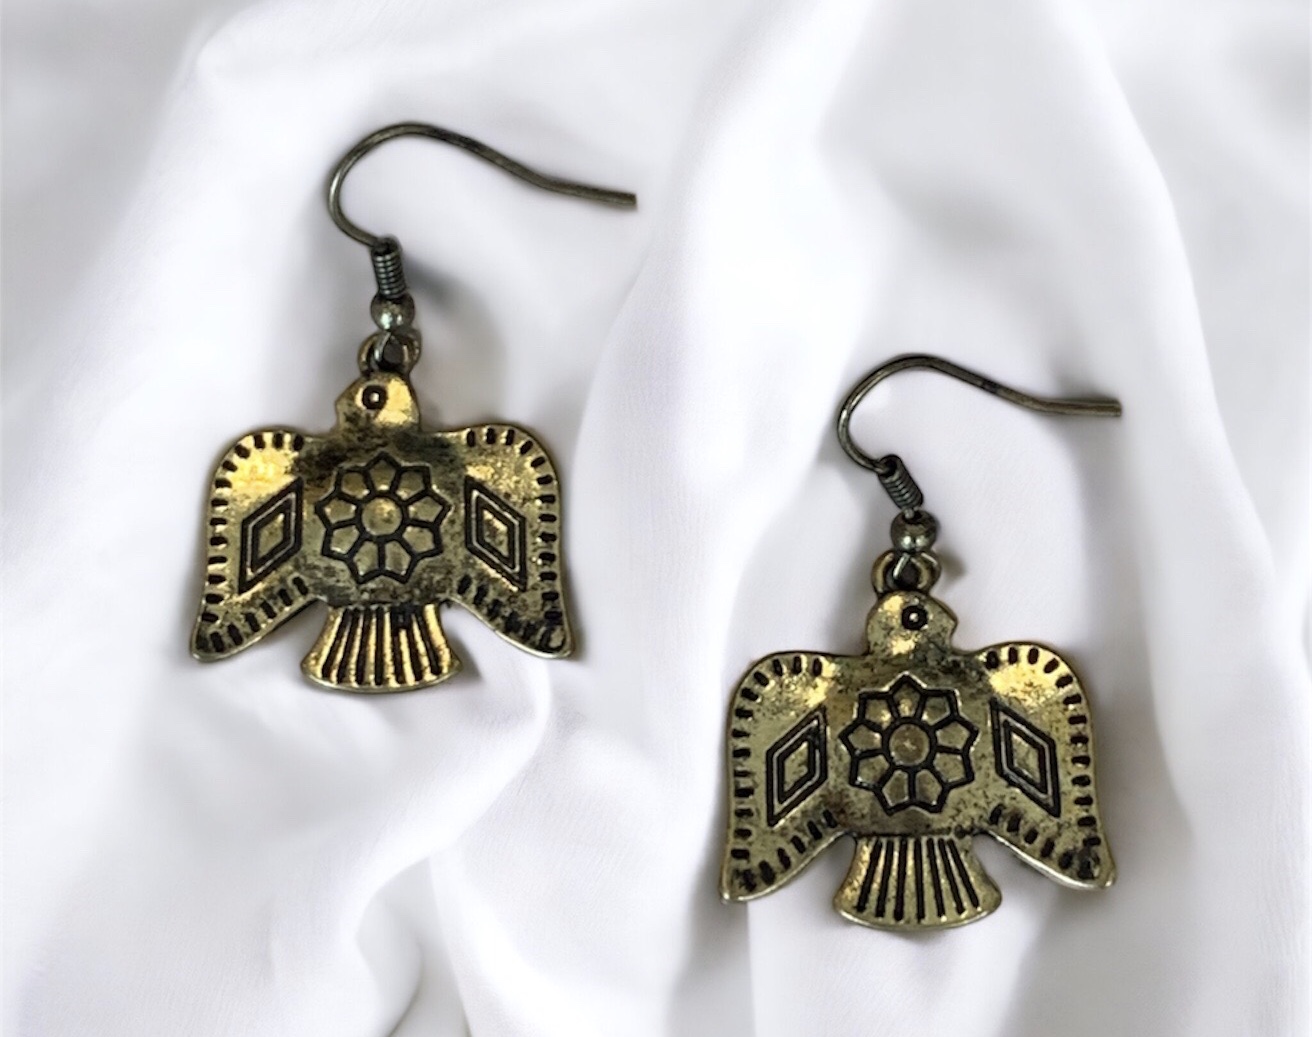 These beautiful earrings measure 1.5 inches long!